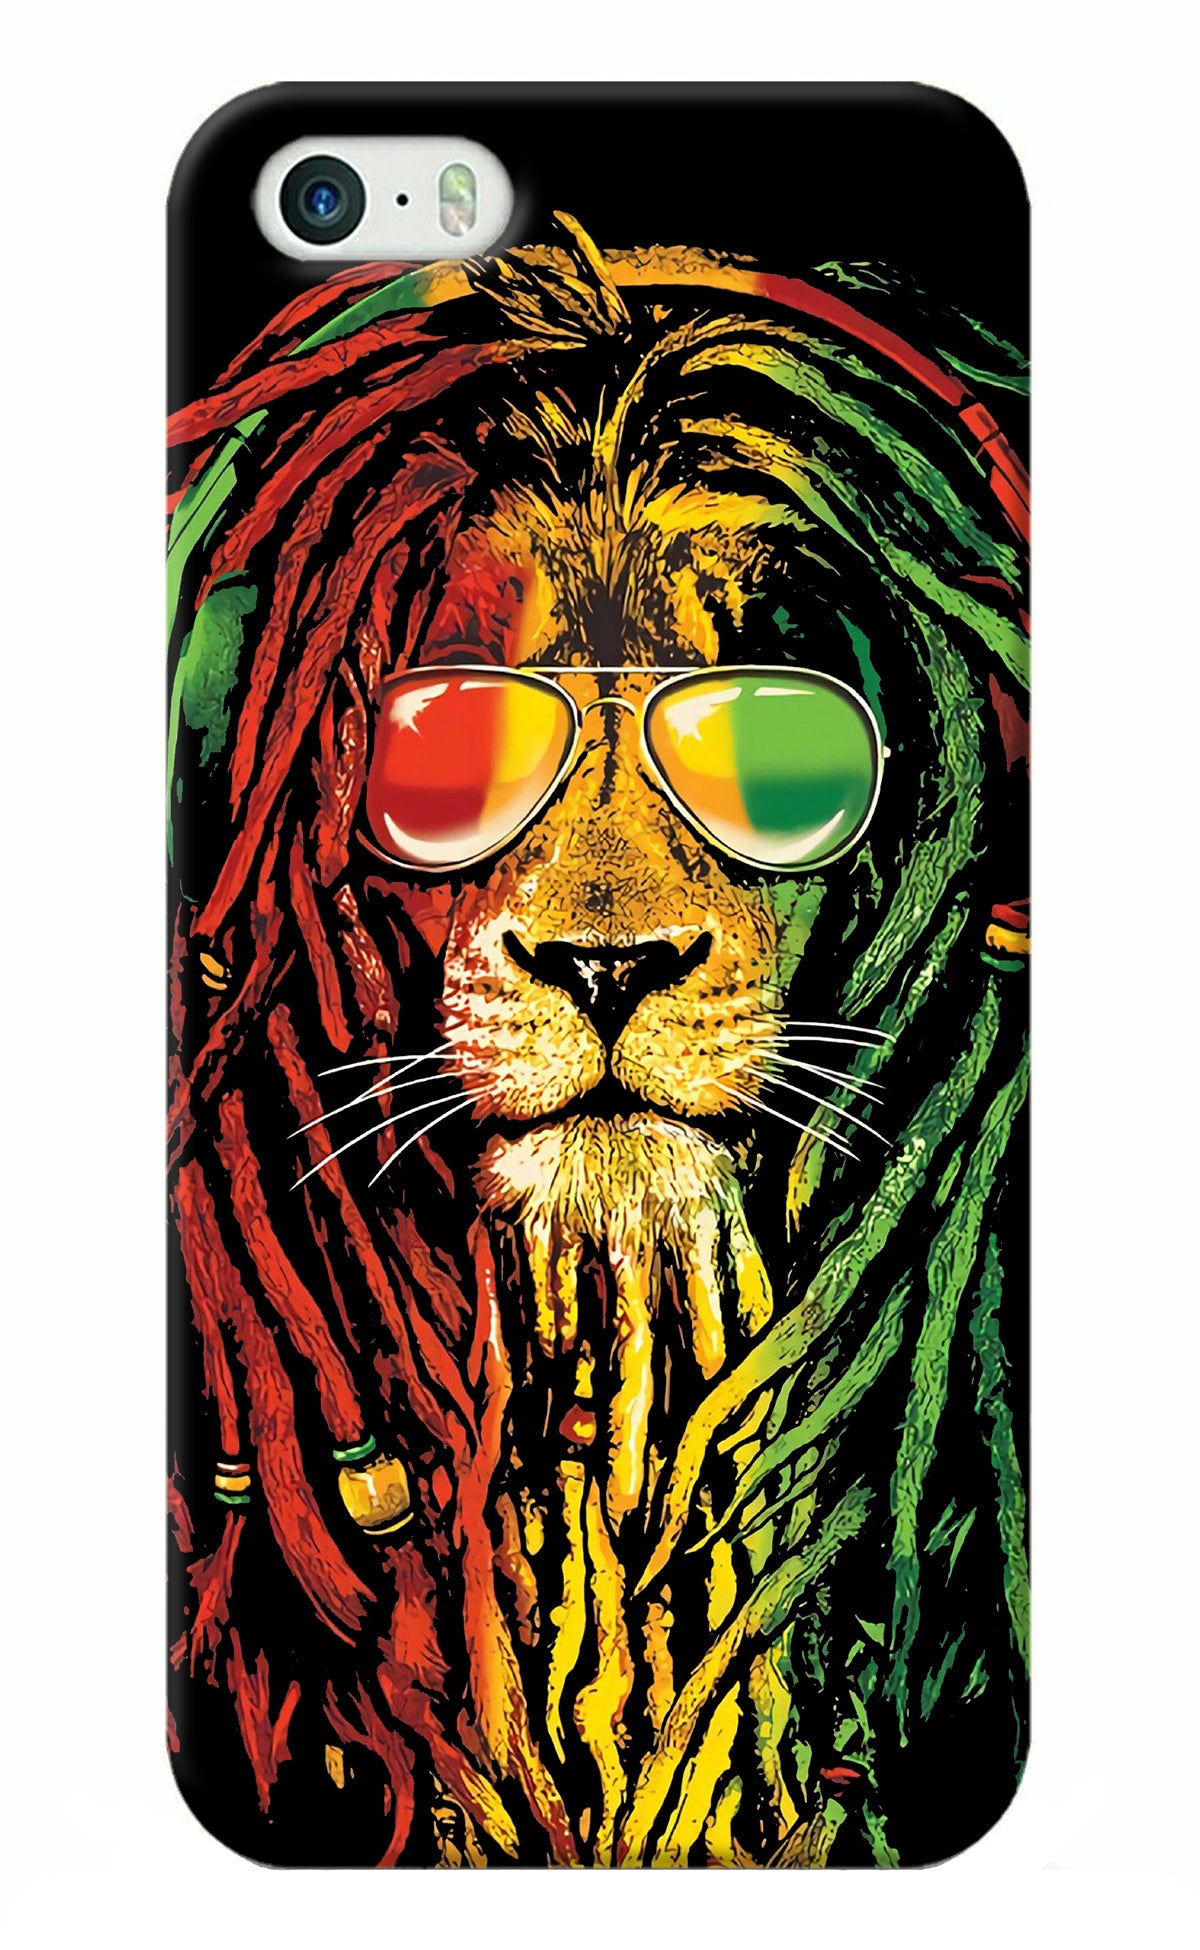 Rasta Lion iPhone 5/5s Back Cover